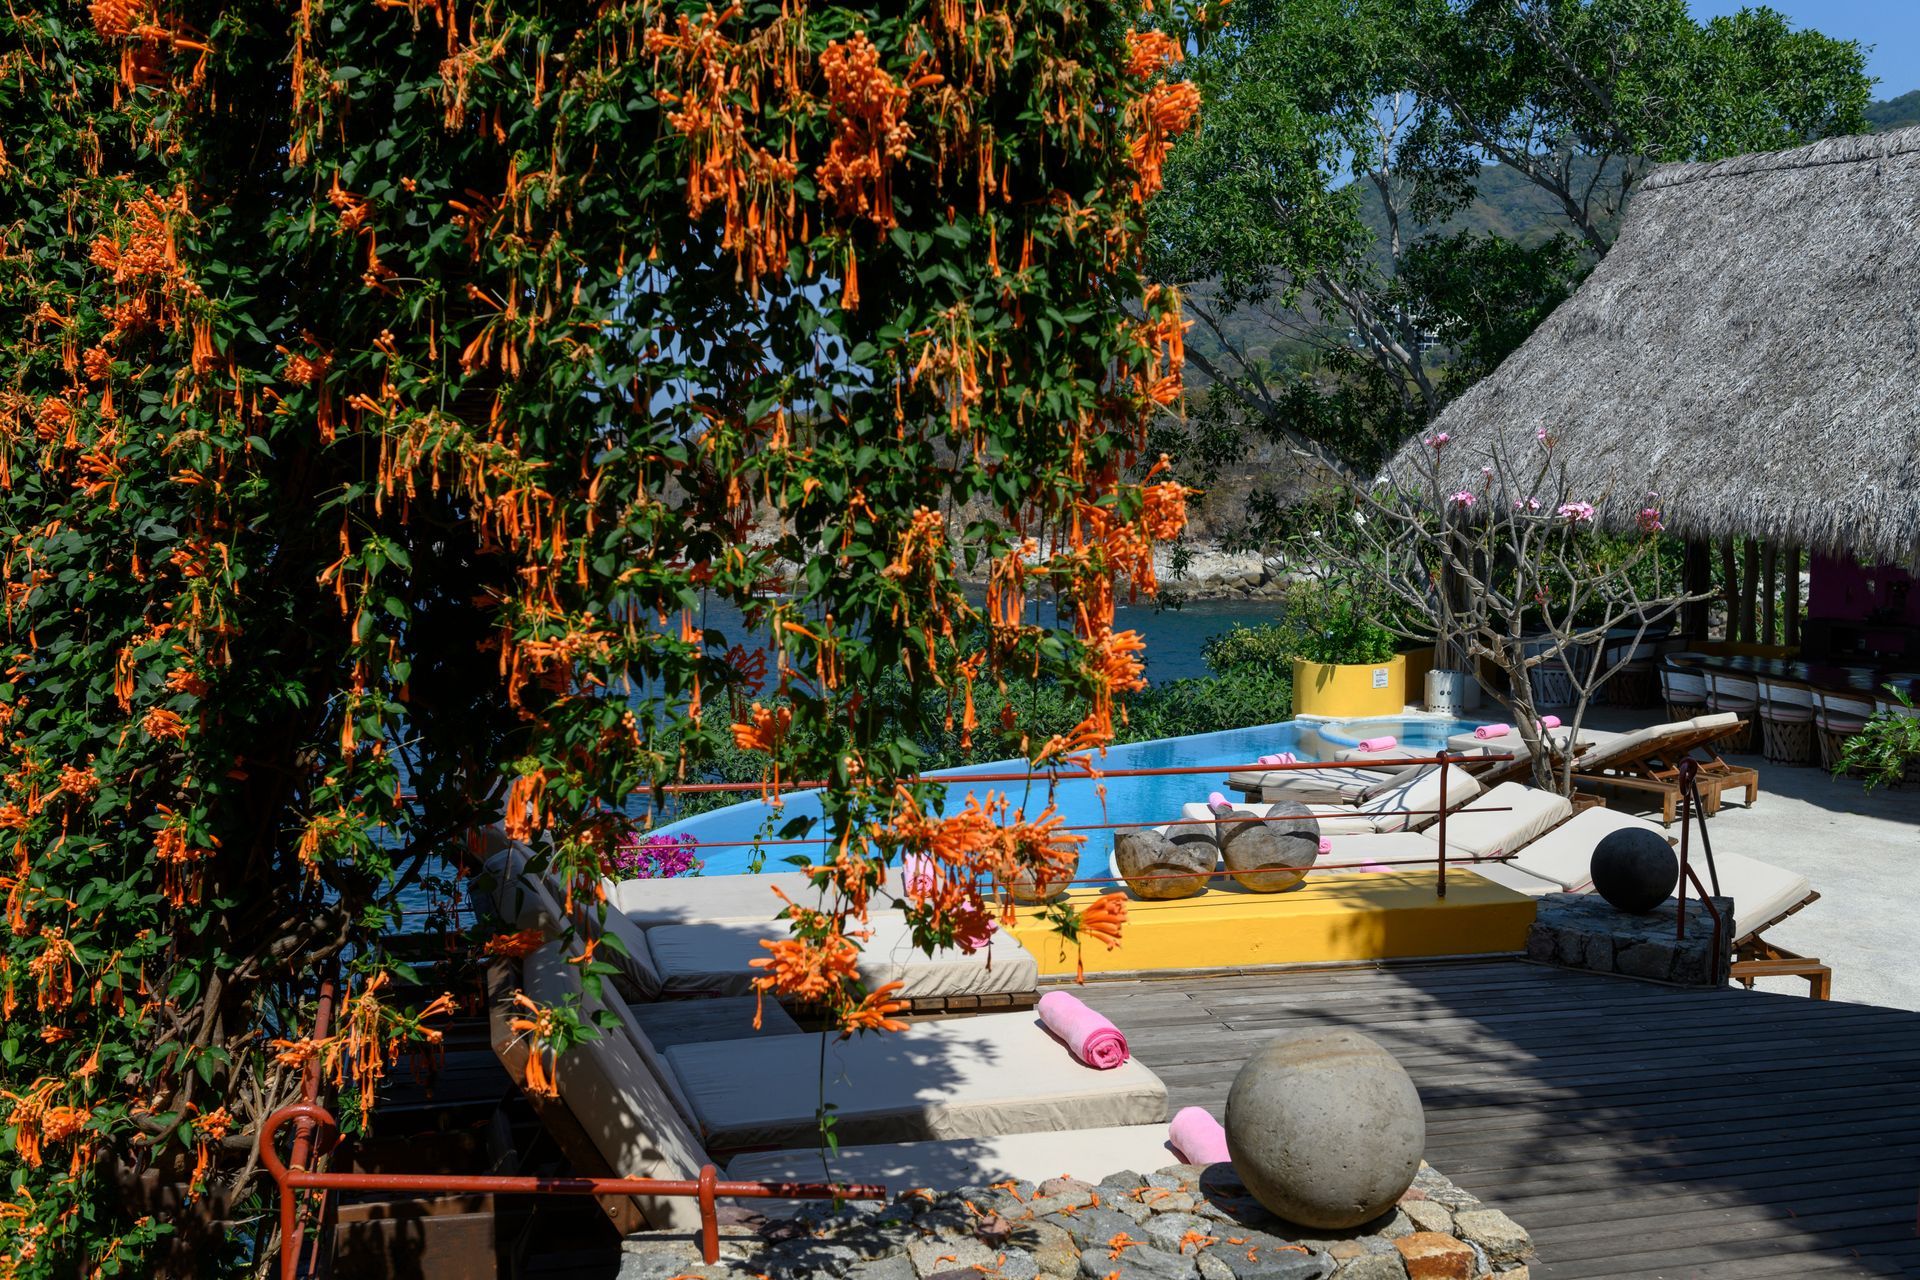 a swimming pool surrounded by chairs and a tree with orange flowers